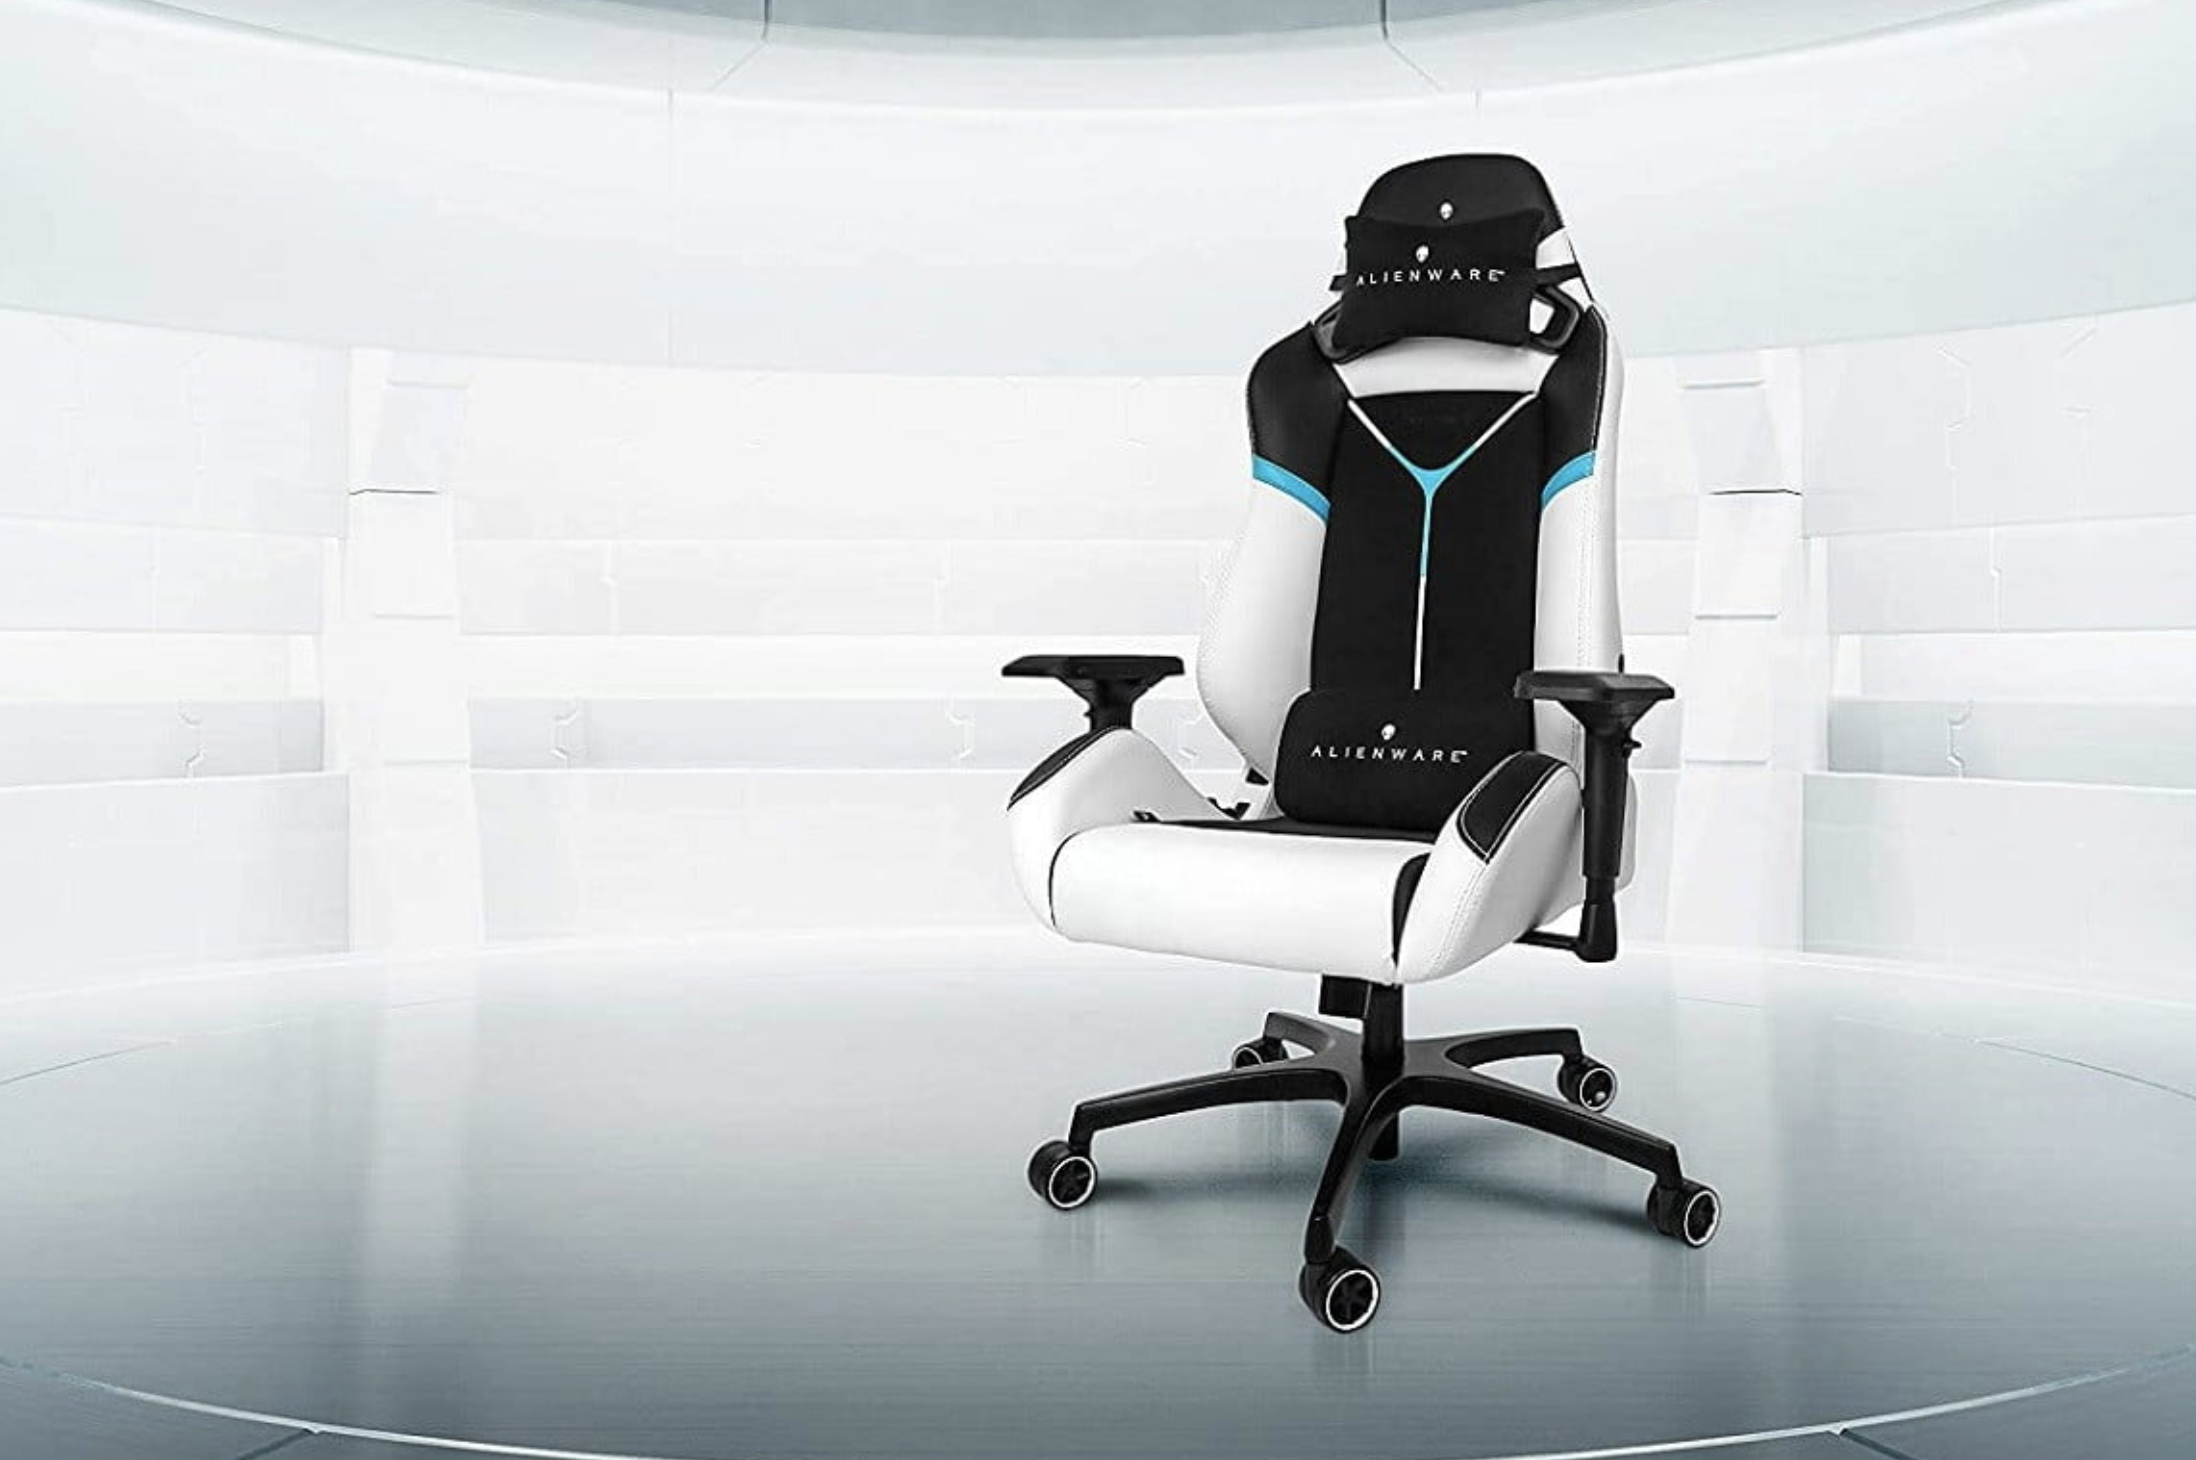 A promotional render of the Alienware S5000 gaming chair.